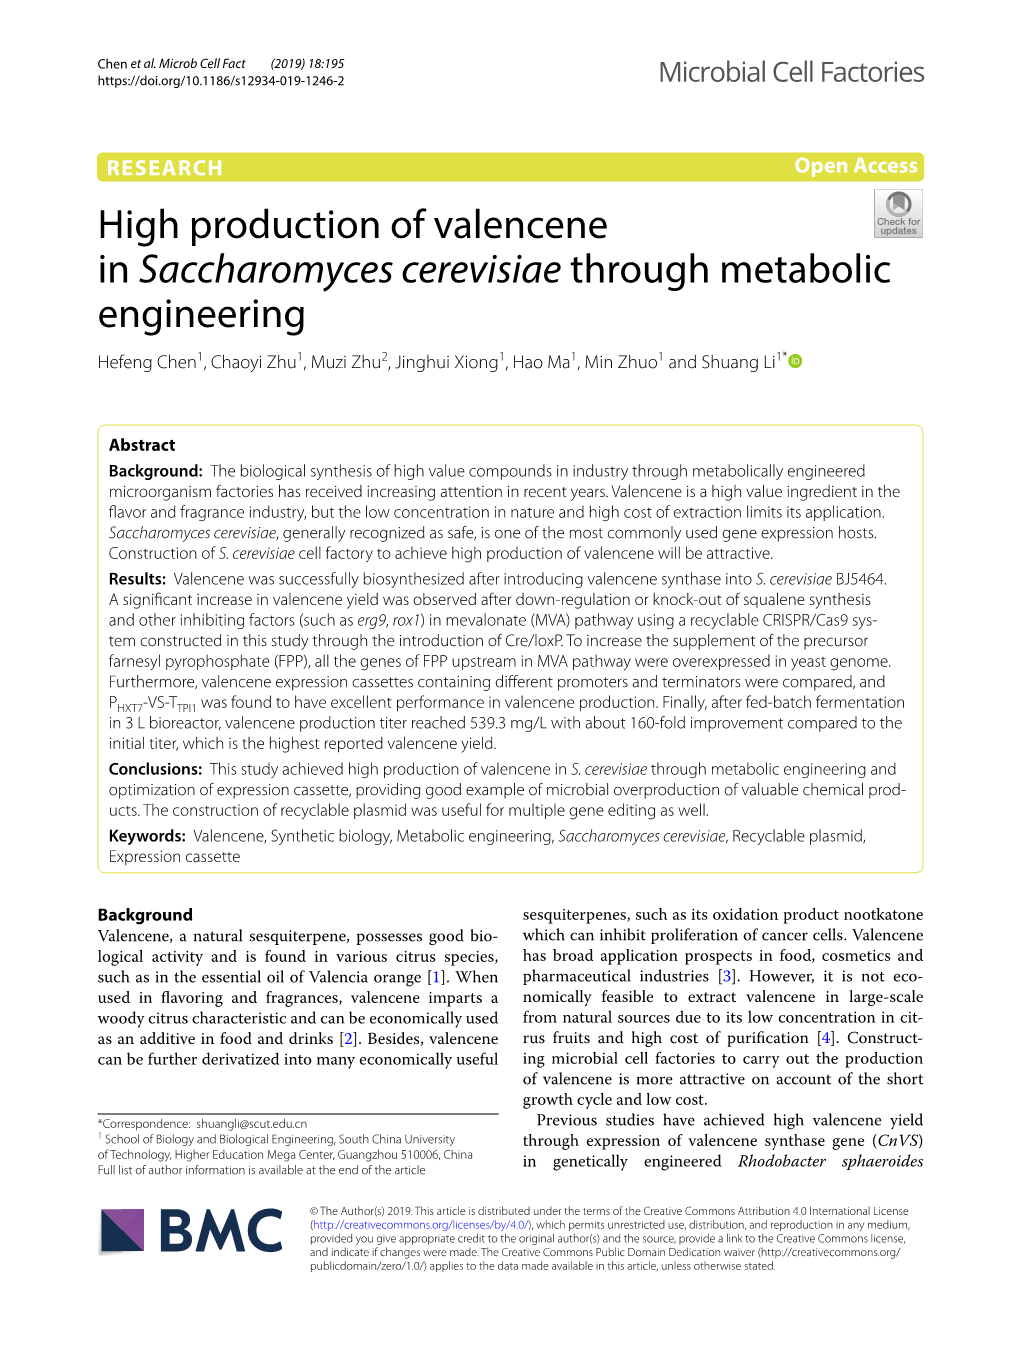 High Production of Valencene in Saccharomyces Cerevisiae Through